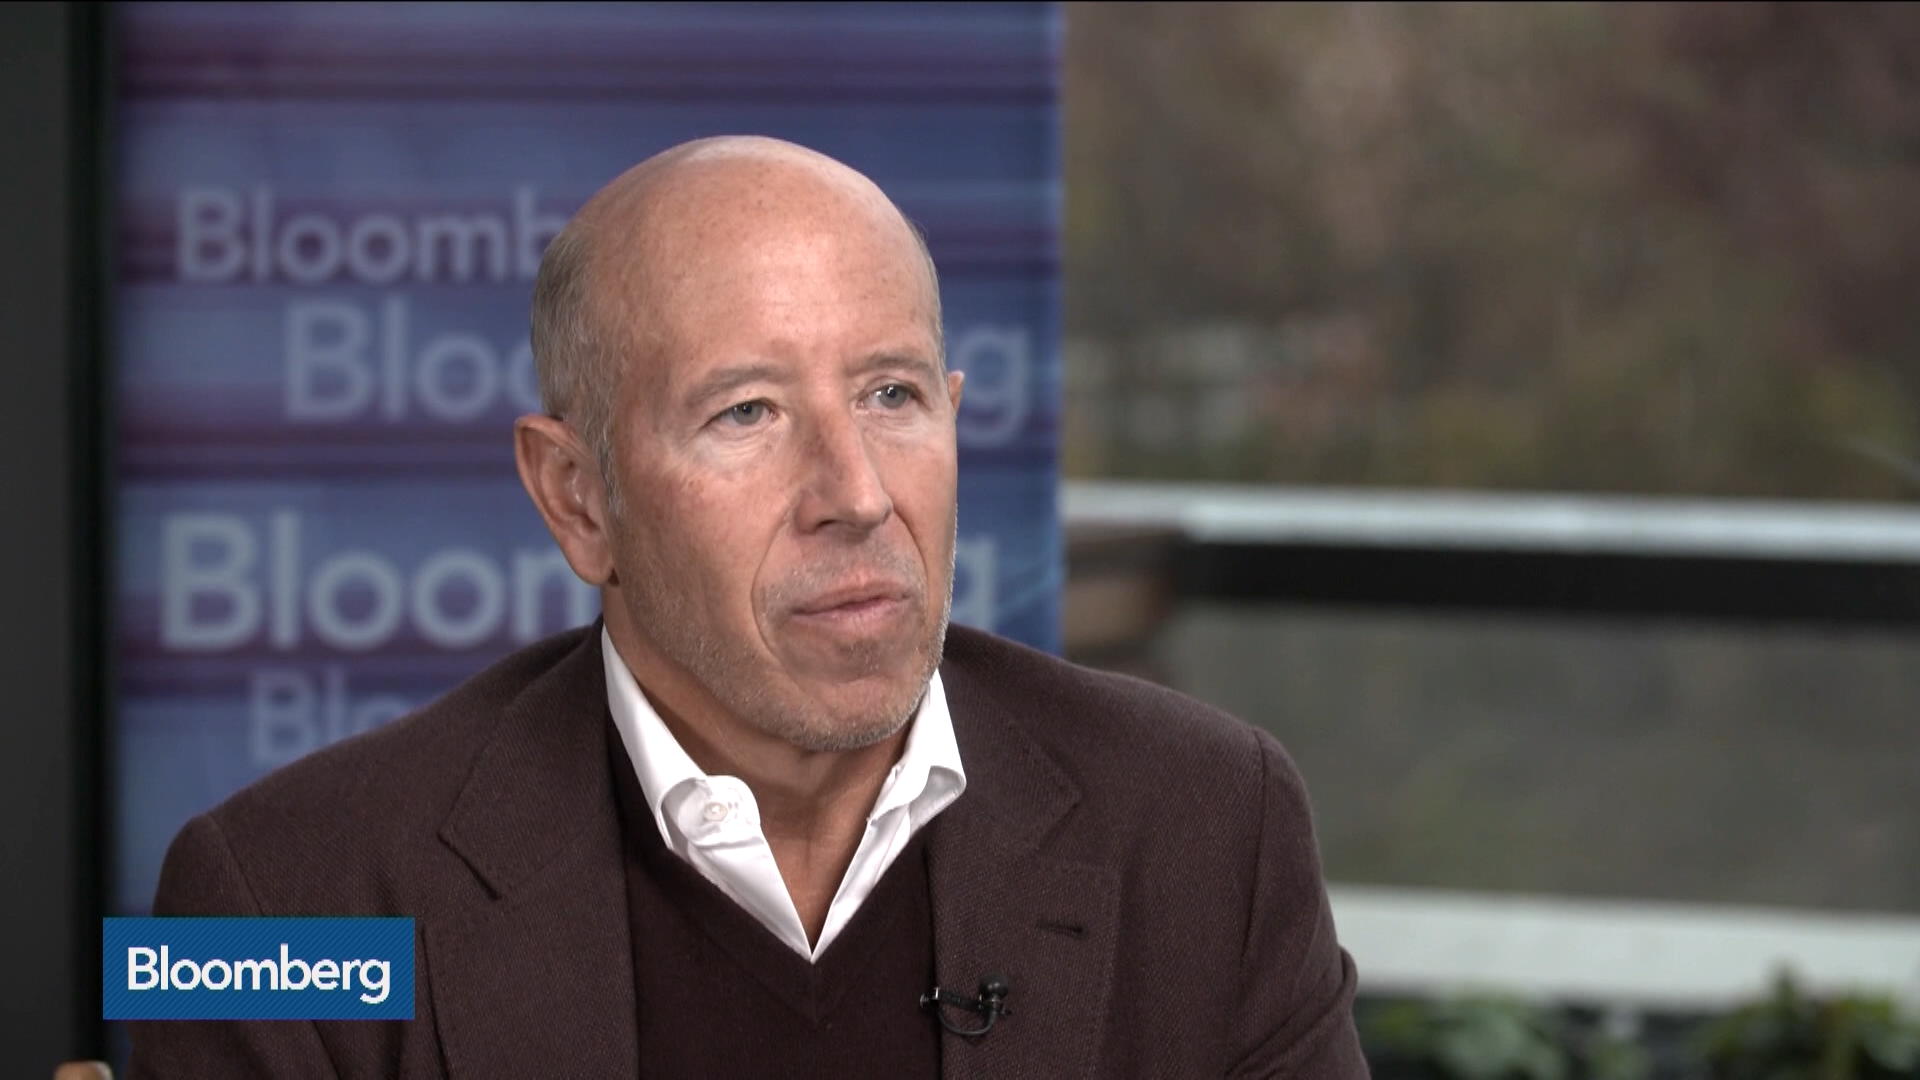 Barry Sternlicht Warns of Over-Heating the U.S. Economy